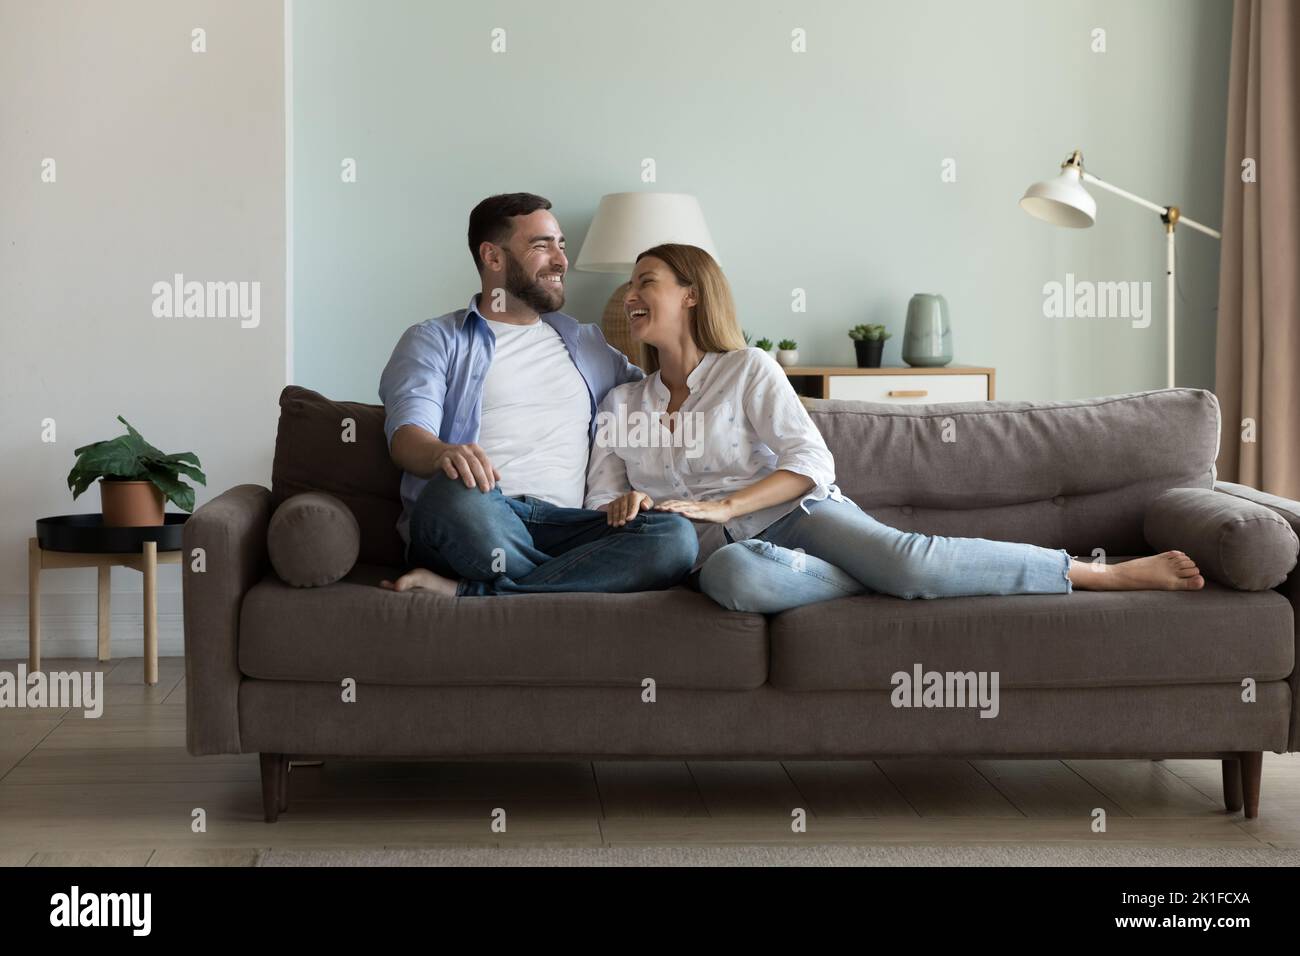 Happy joyful married couple resting on comfortable couch together Stock Photo